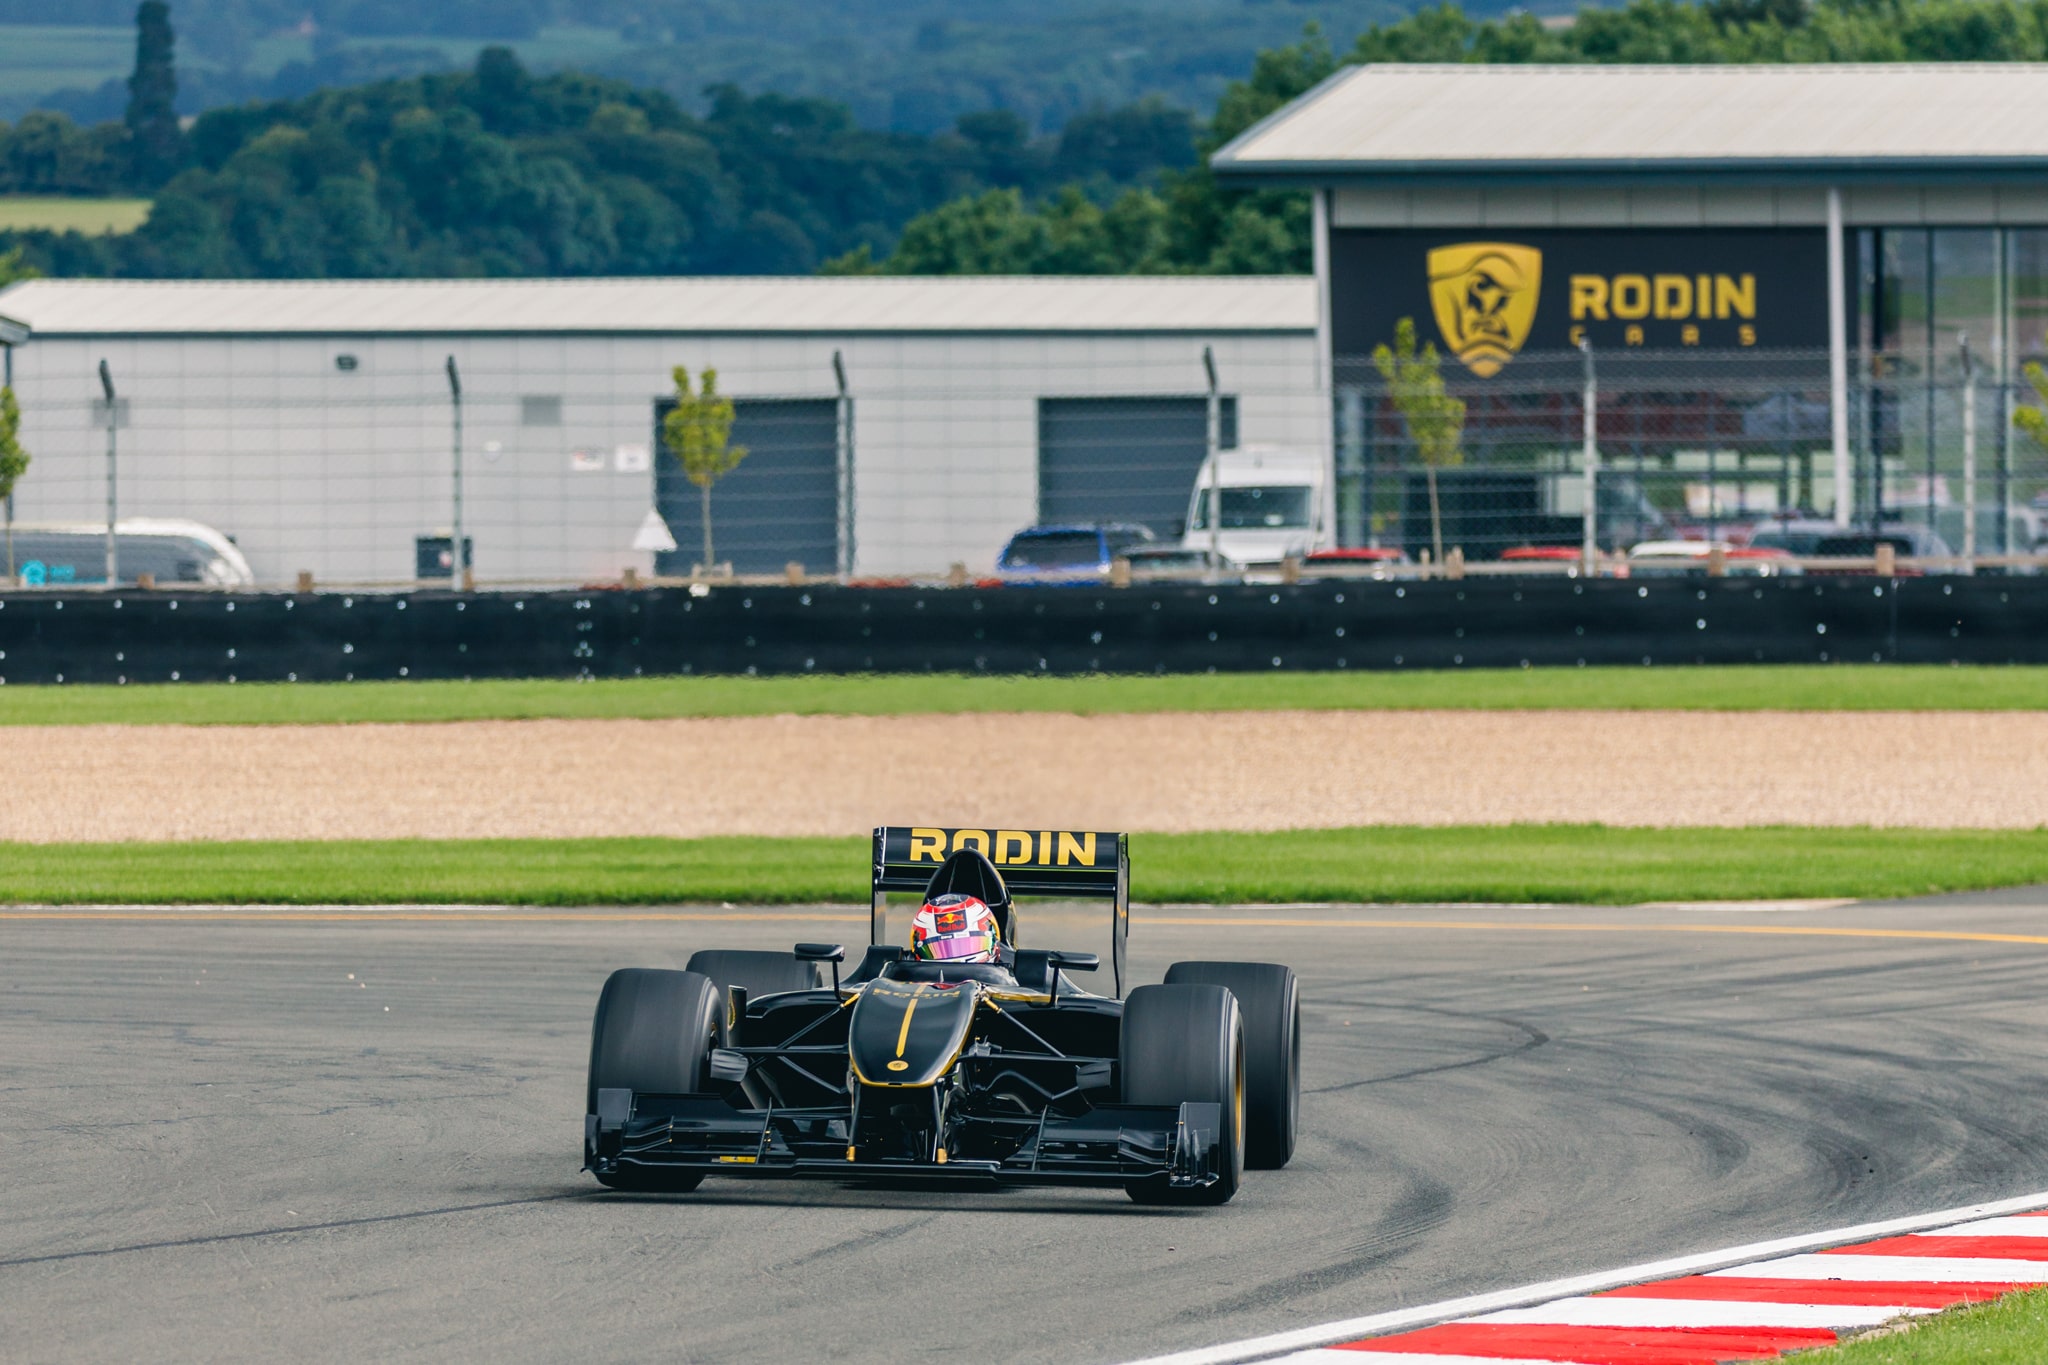 DONINGTON NATIONAL CIRCUIT RECORD FOR RODIN FZED